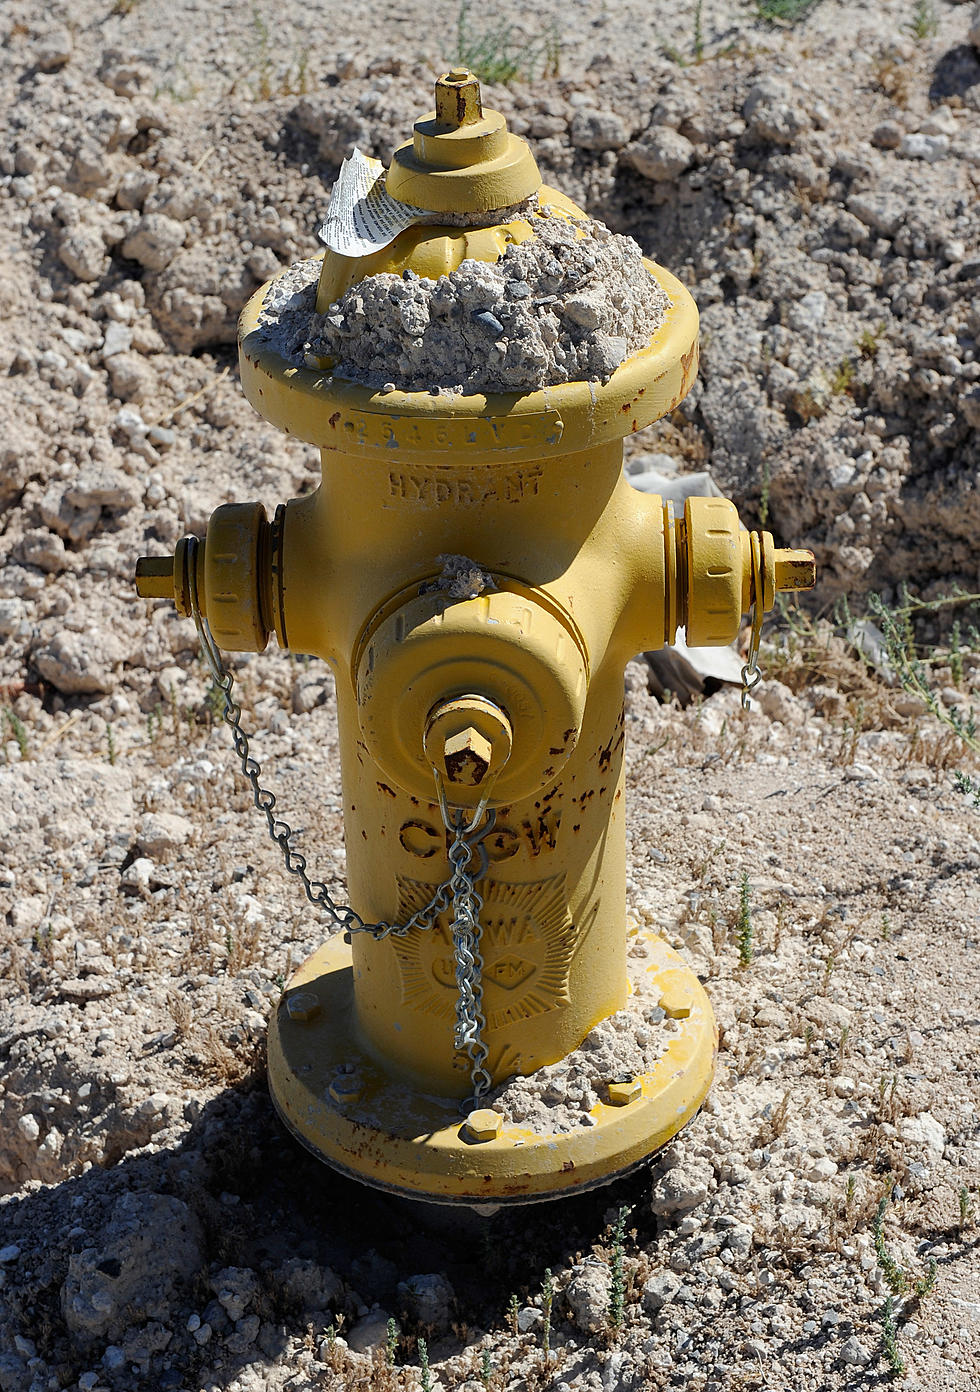 Hydrant Flushing Project Underway